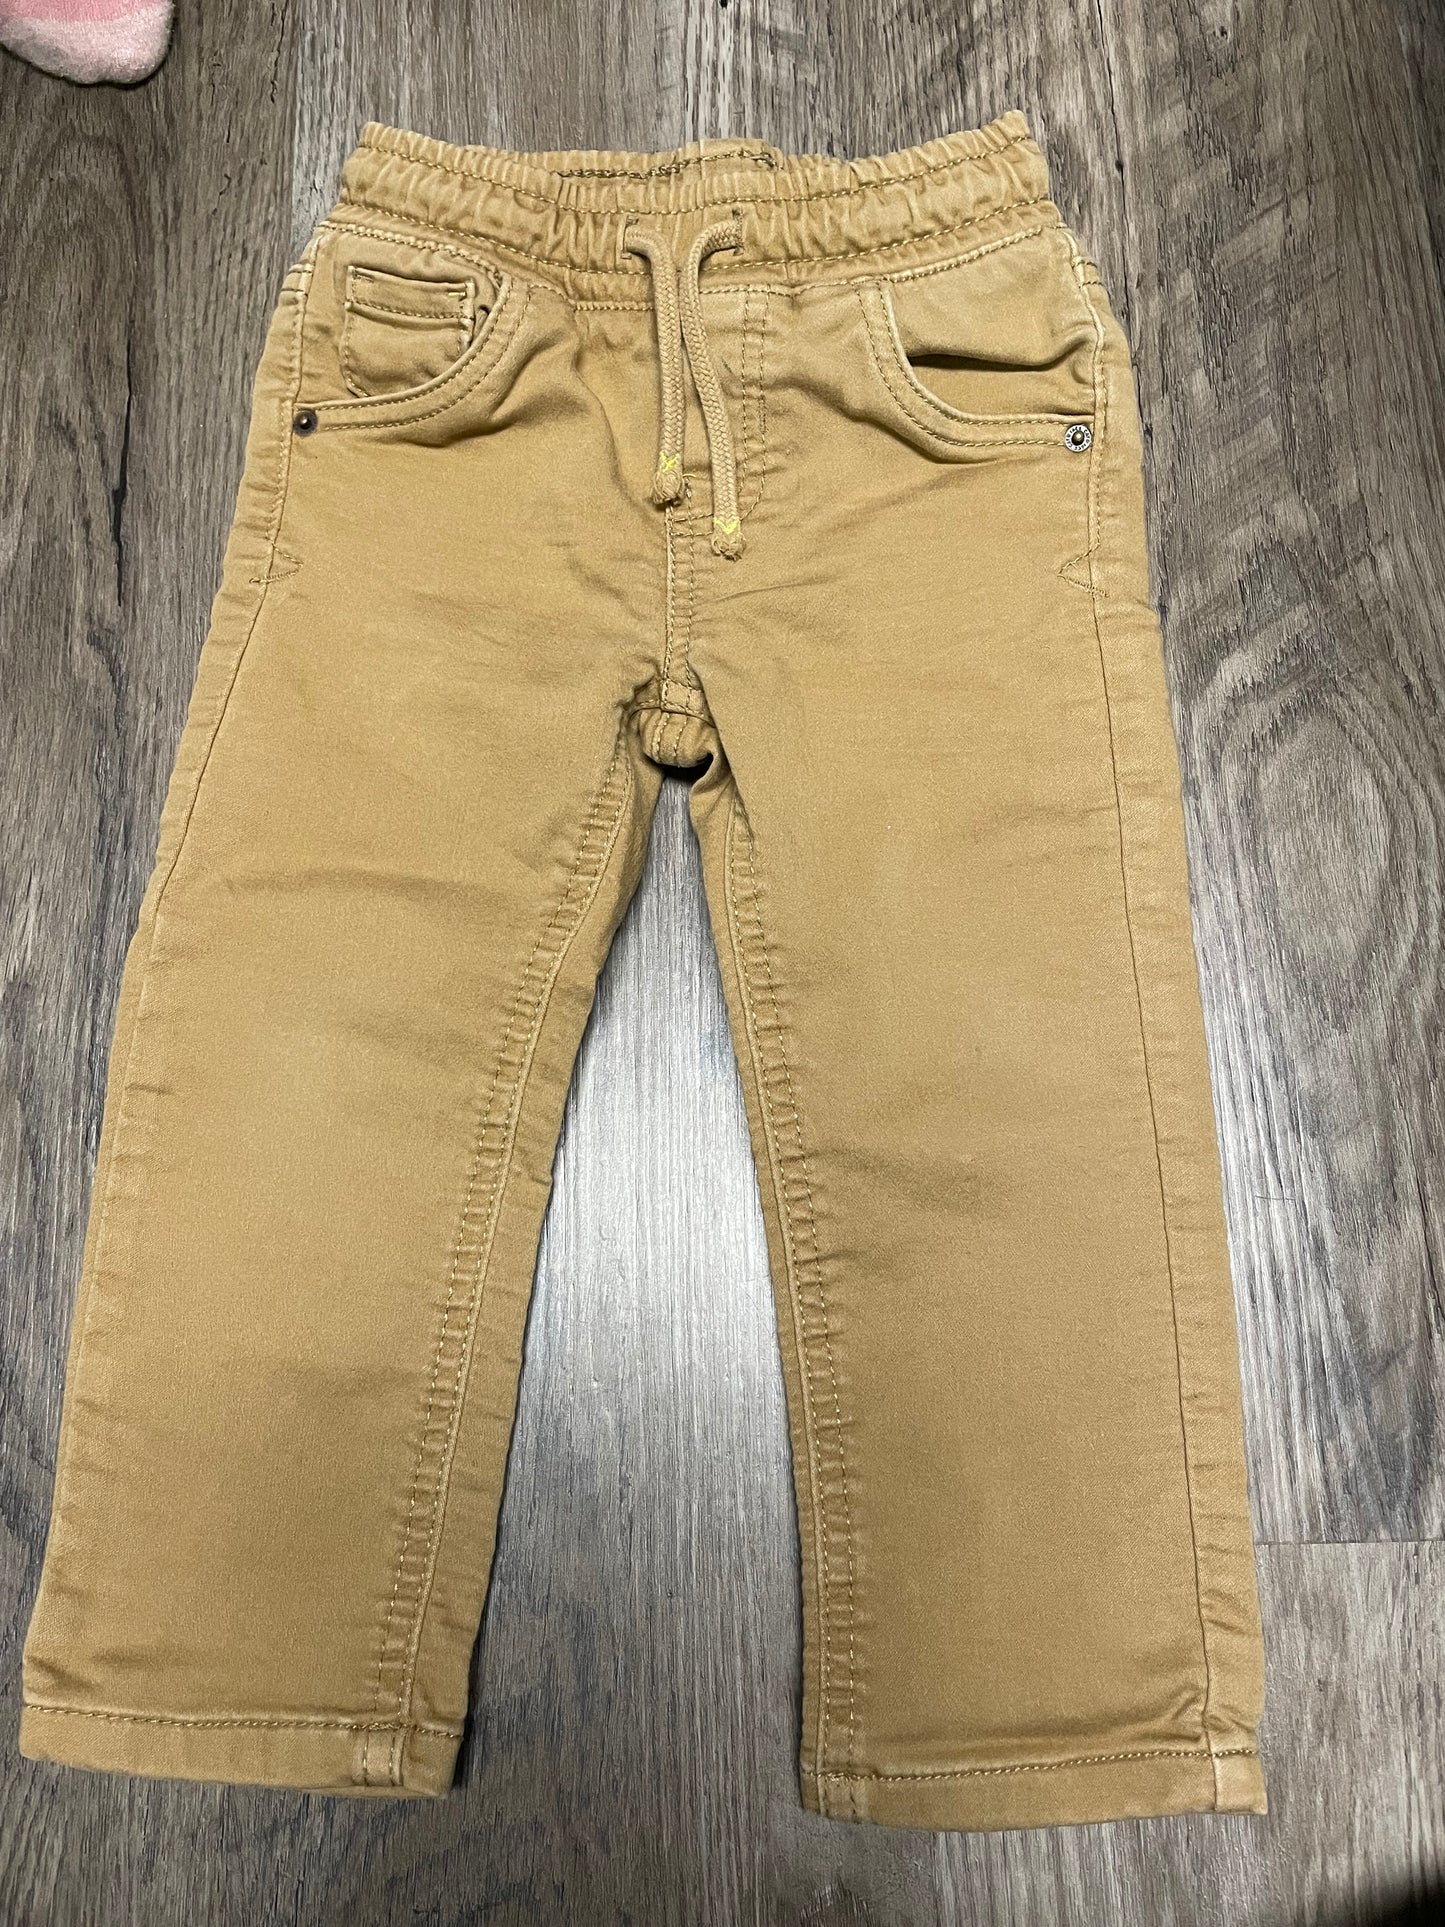 GUC toddler boy 2T cat and jack Jeggings pants